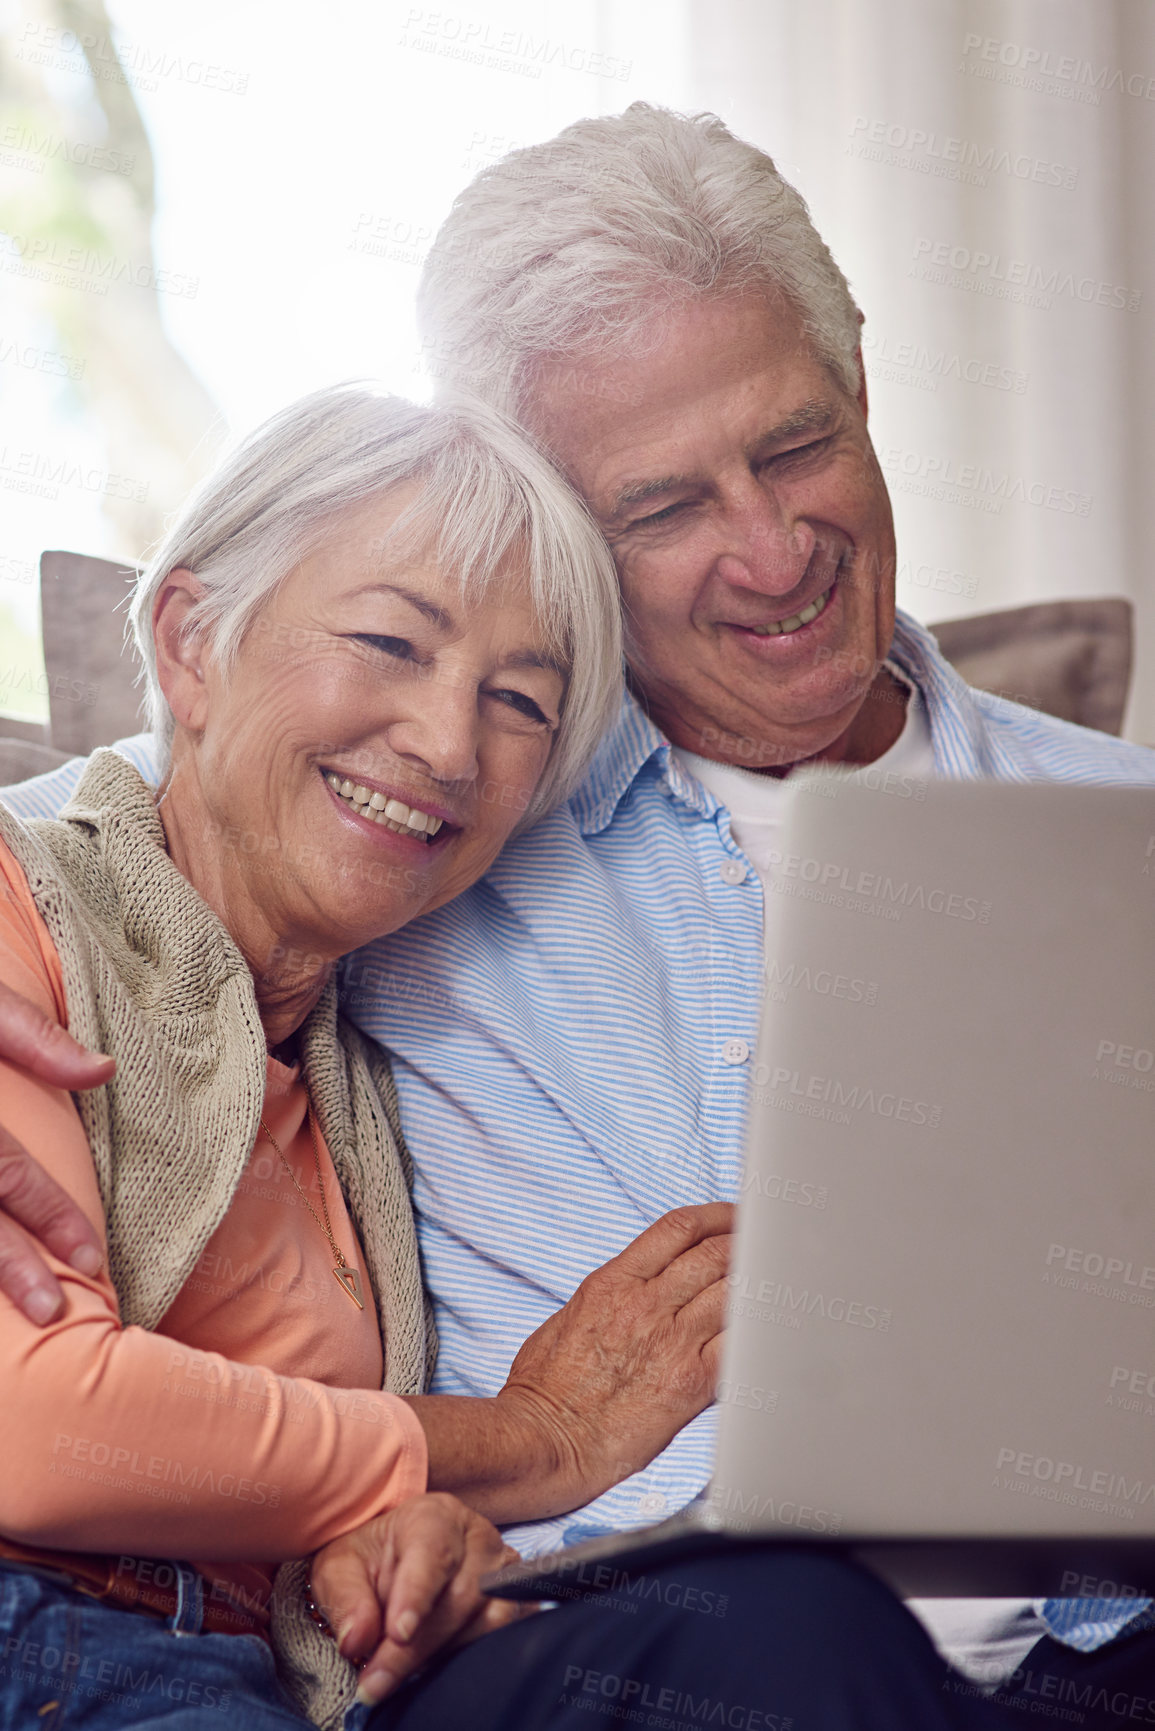 Buy stock photo Shot of a senior couple using a laptop at home